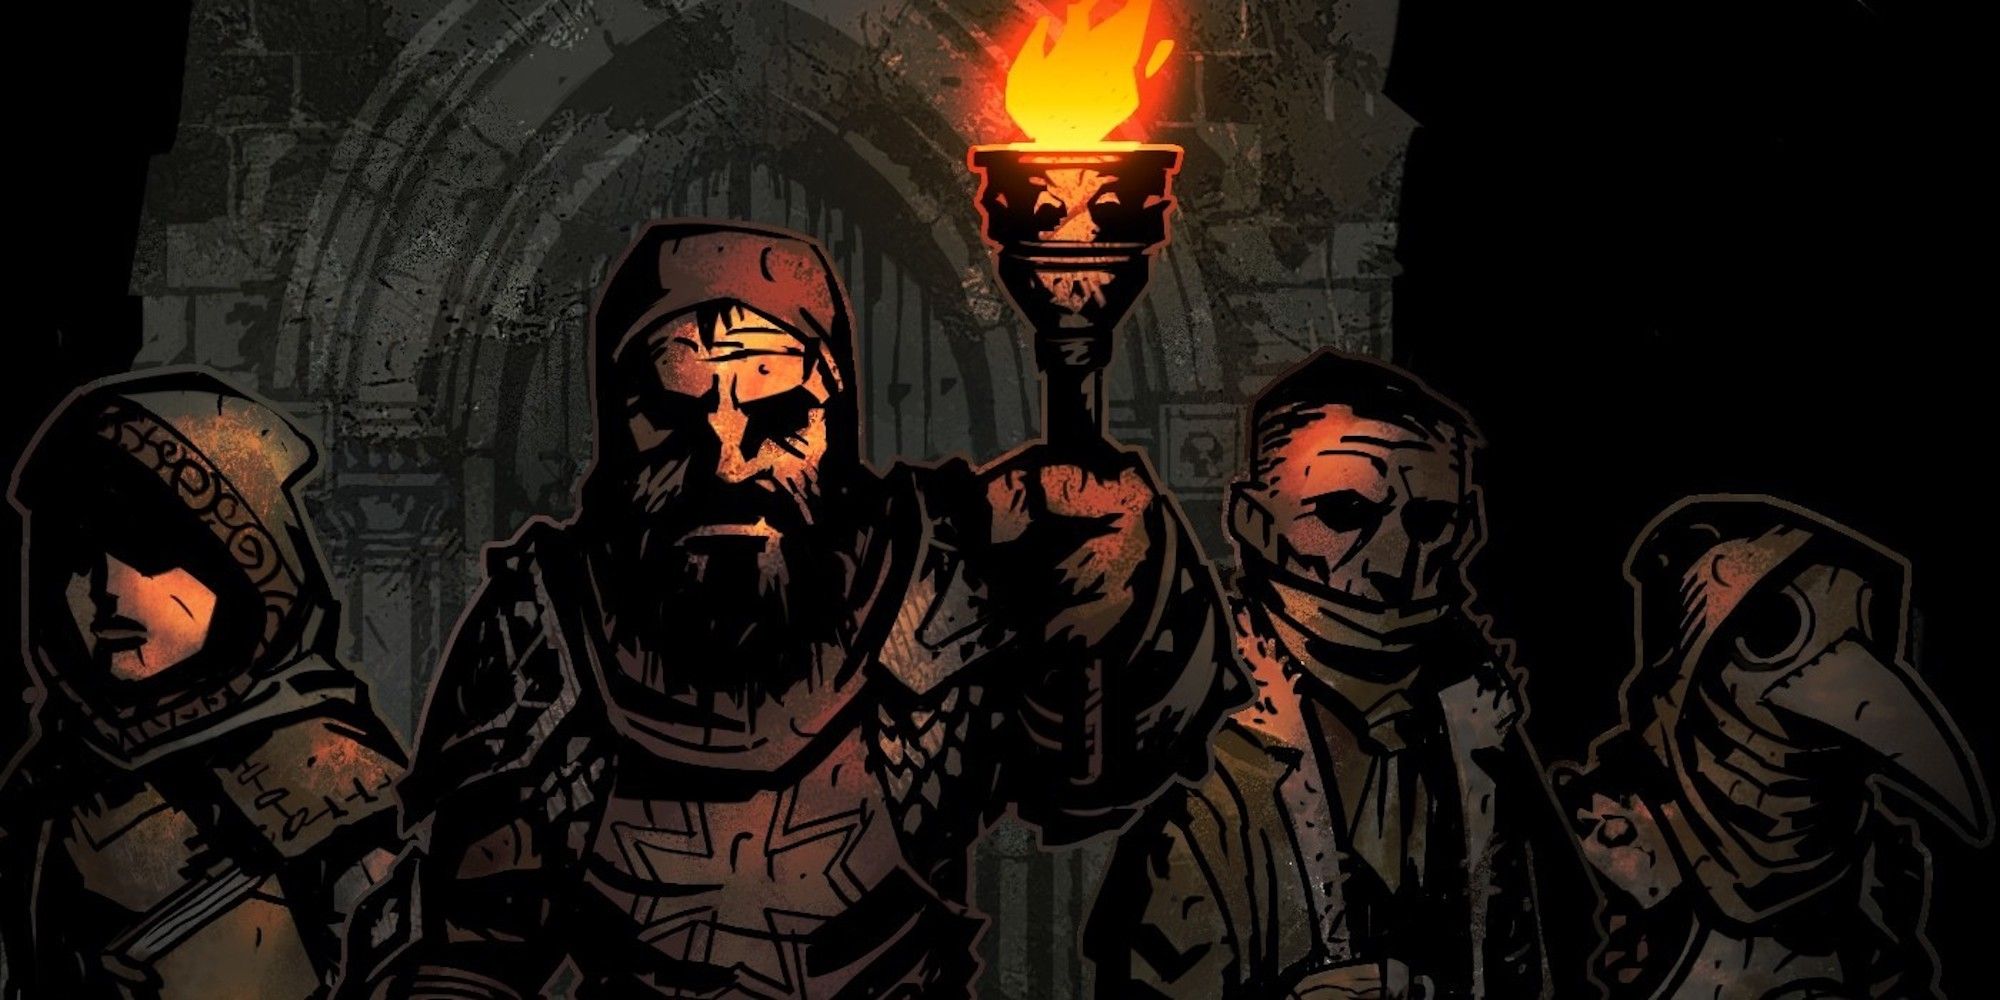 Promo art featuring characters in Darkest Dungeon